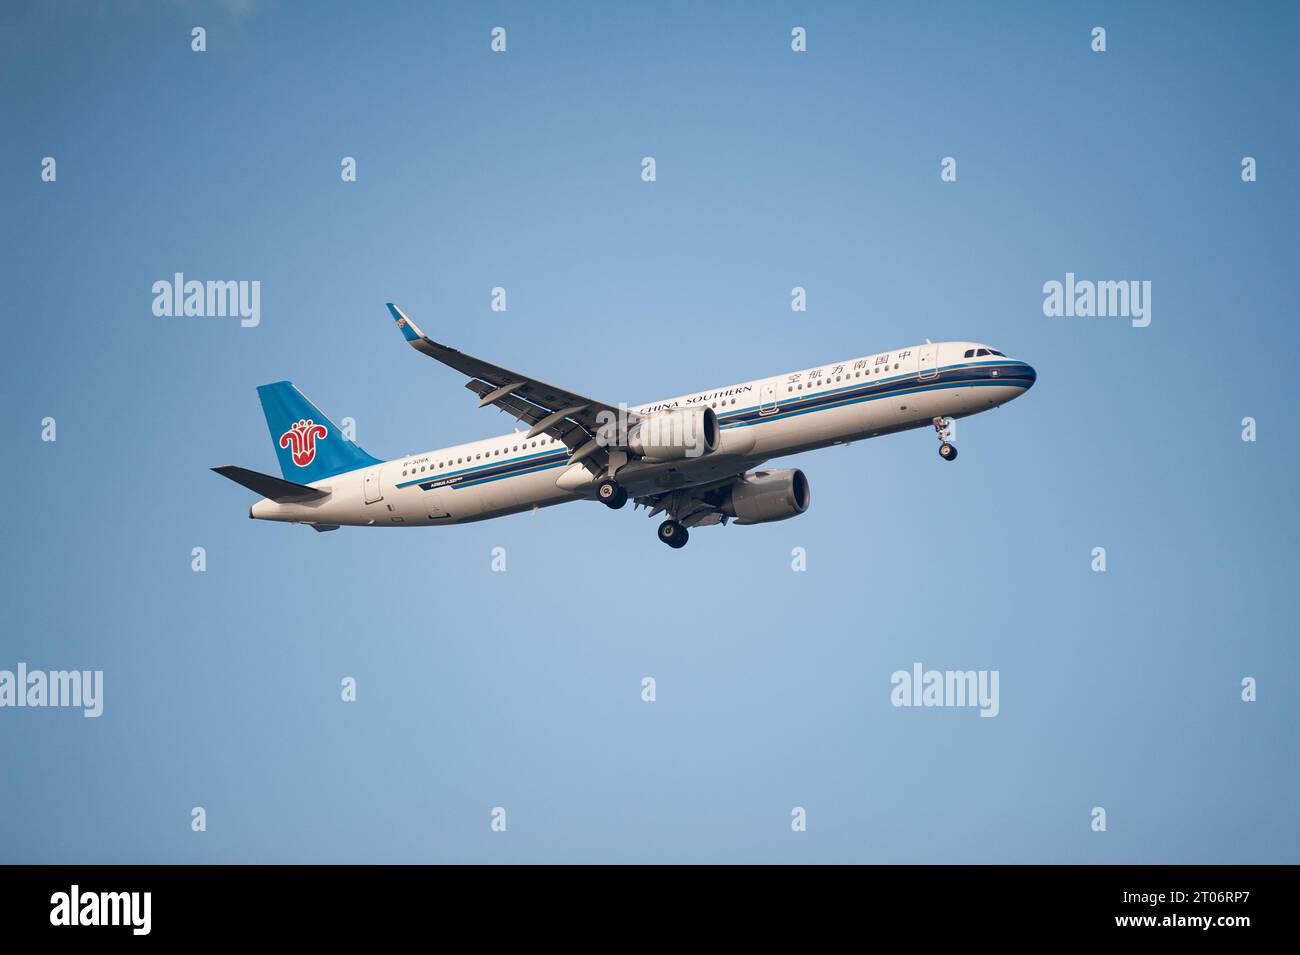 26.07.2023, Singapore, Republic of Singapore, Asia - China Southern Airlines Airbus A321-200 Neo passenger aircraft approaches Changi Airport. Stock Photo